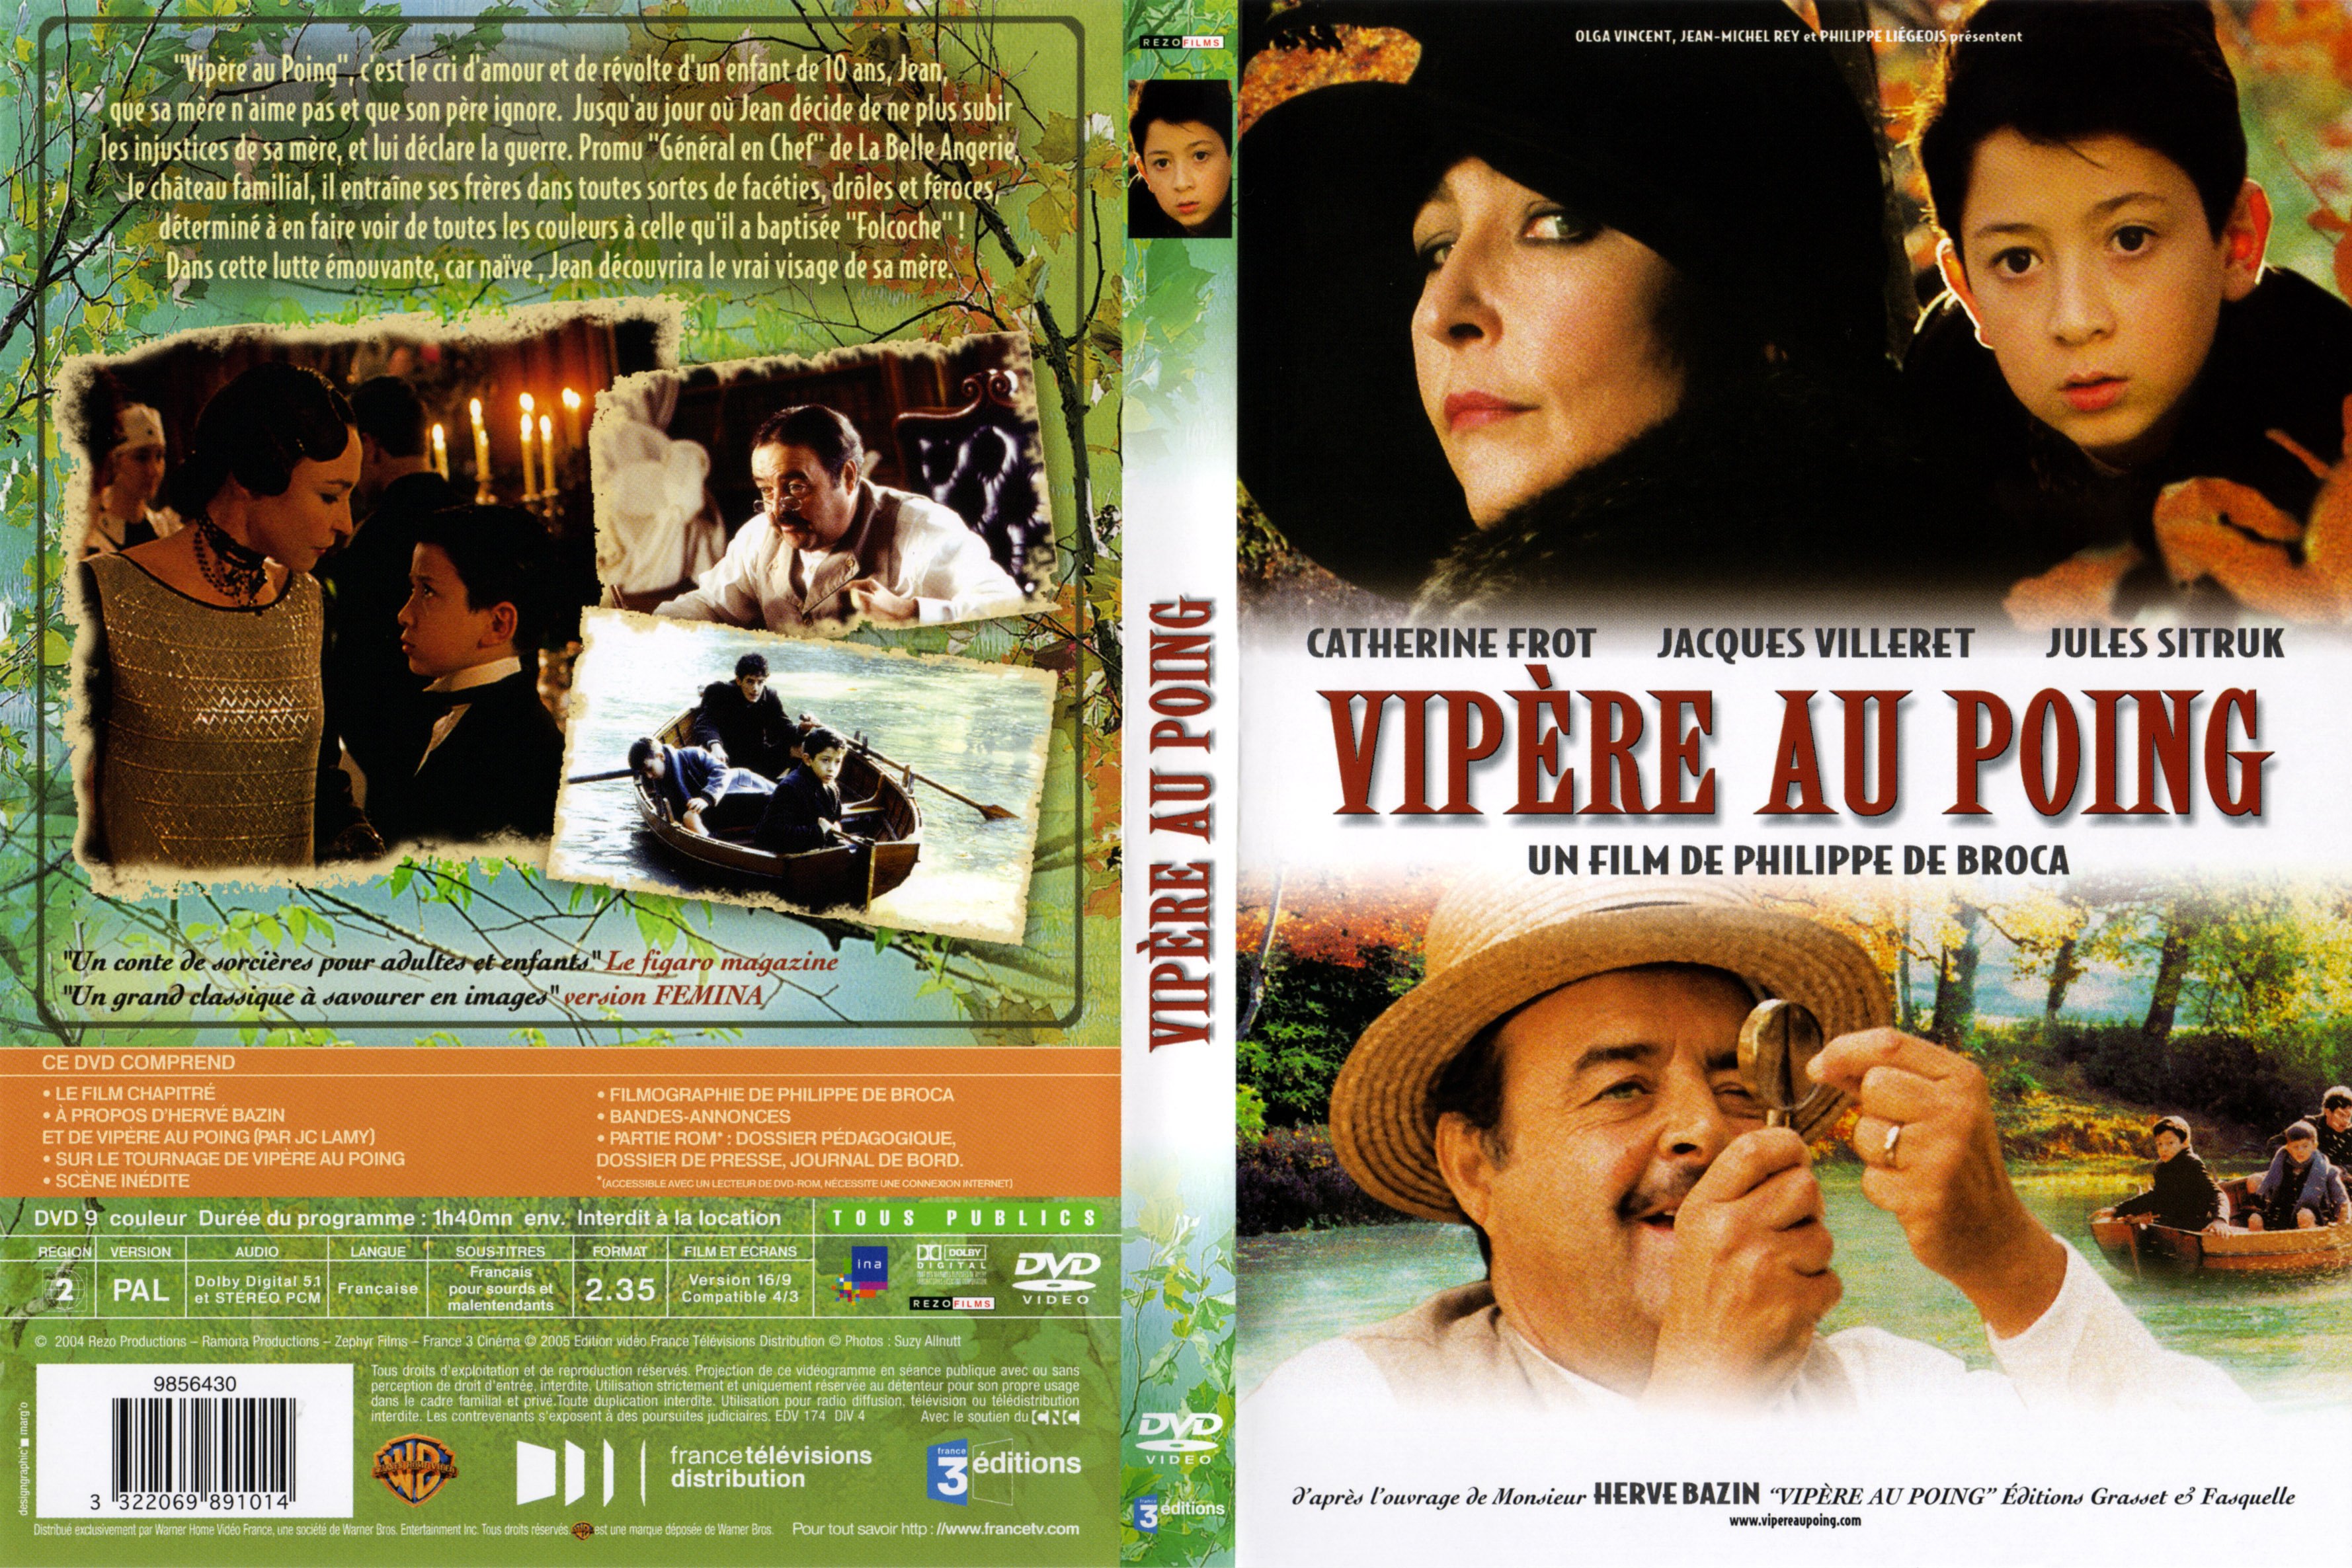 Jaquette DVD Vipre au poing